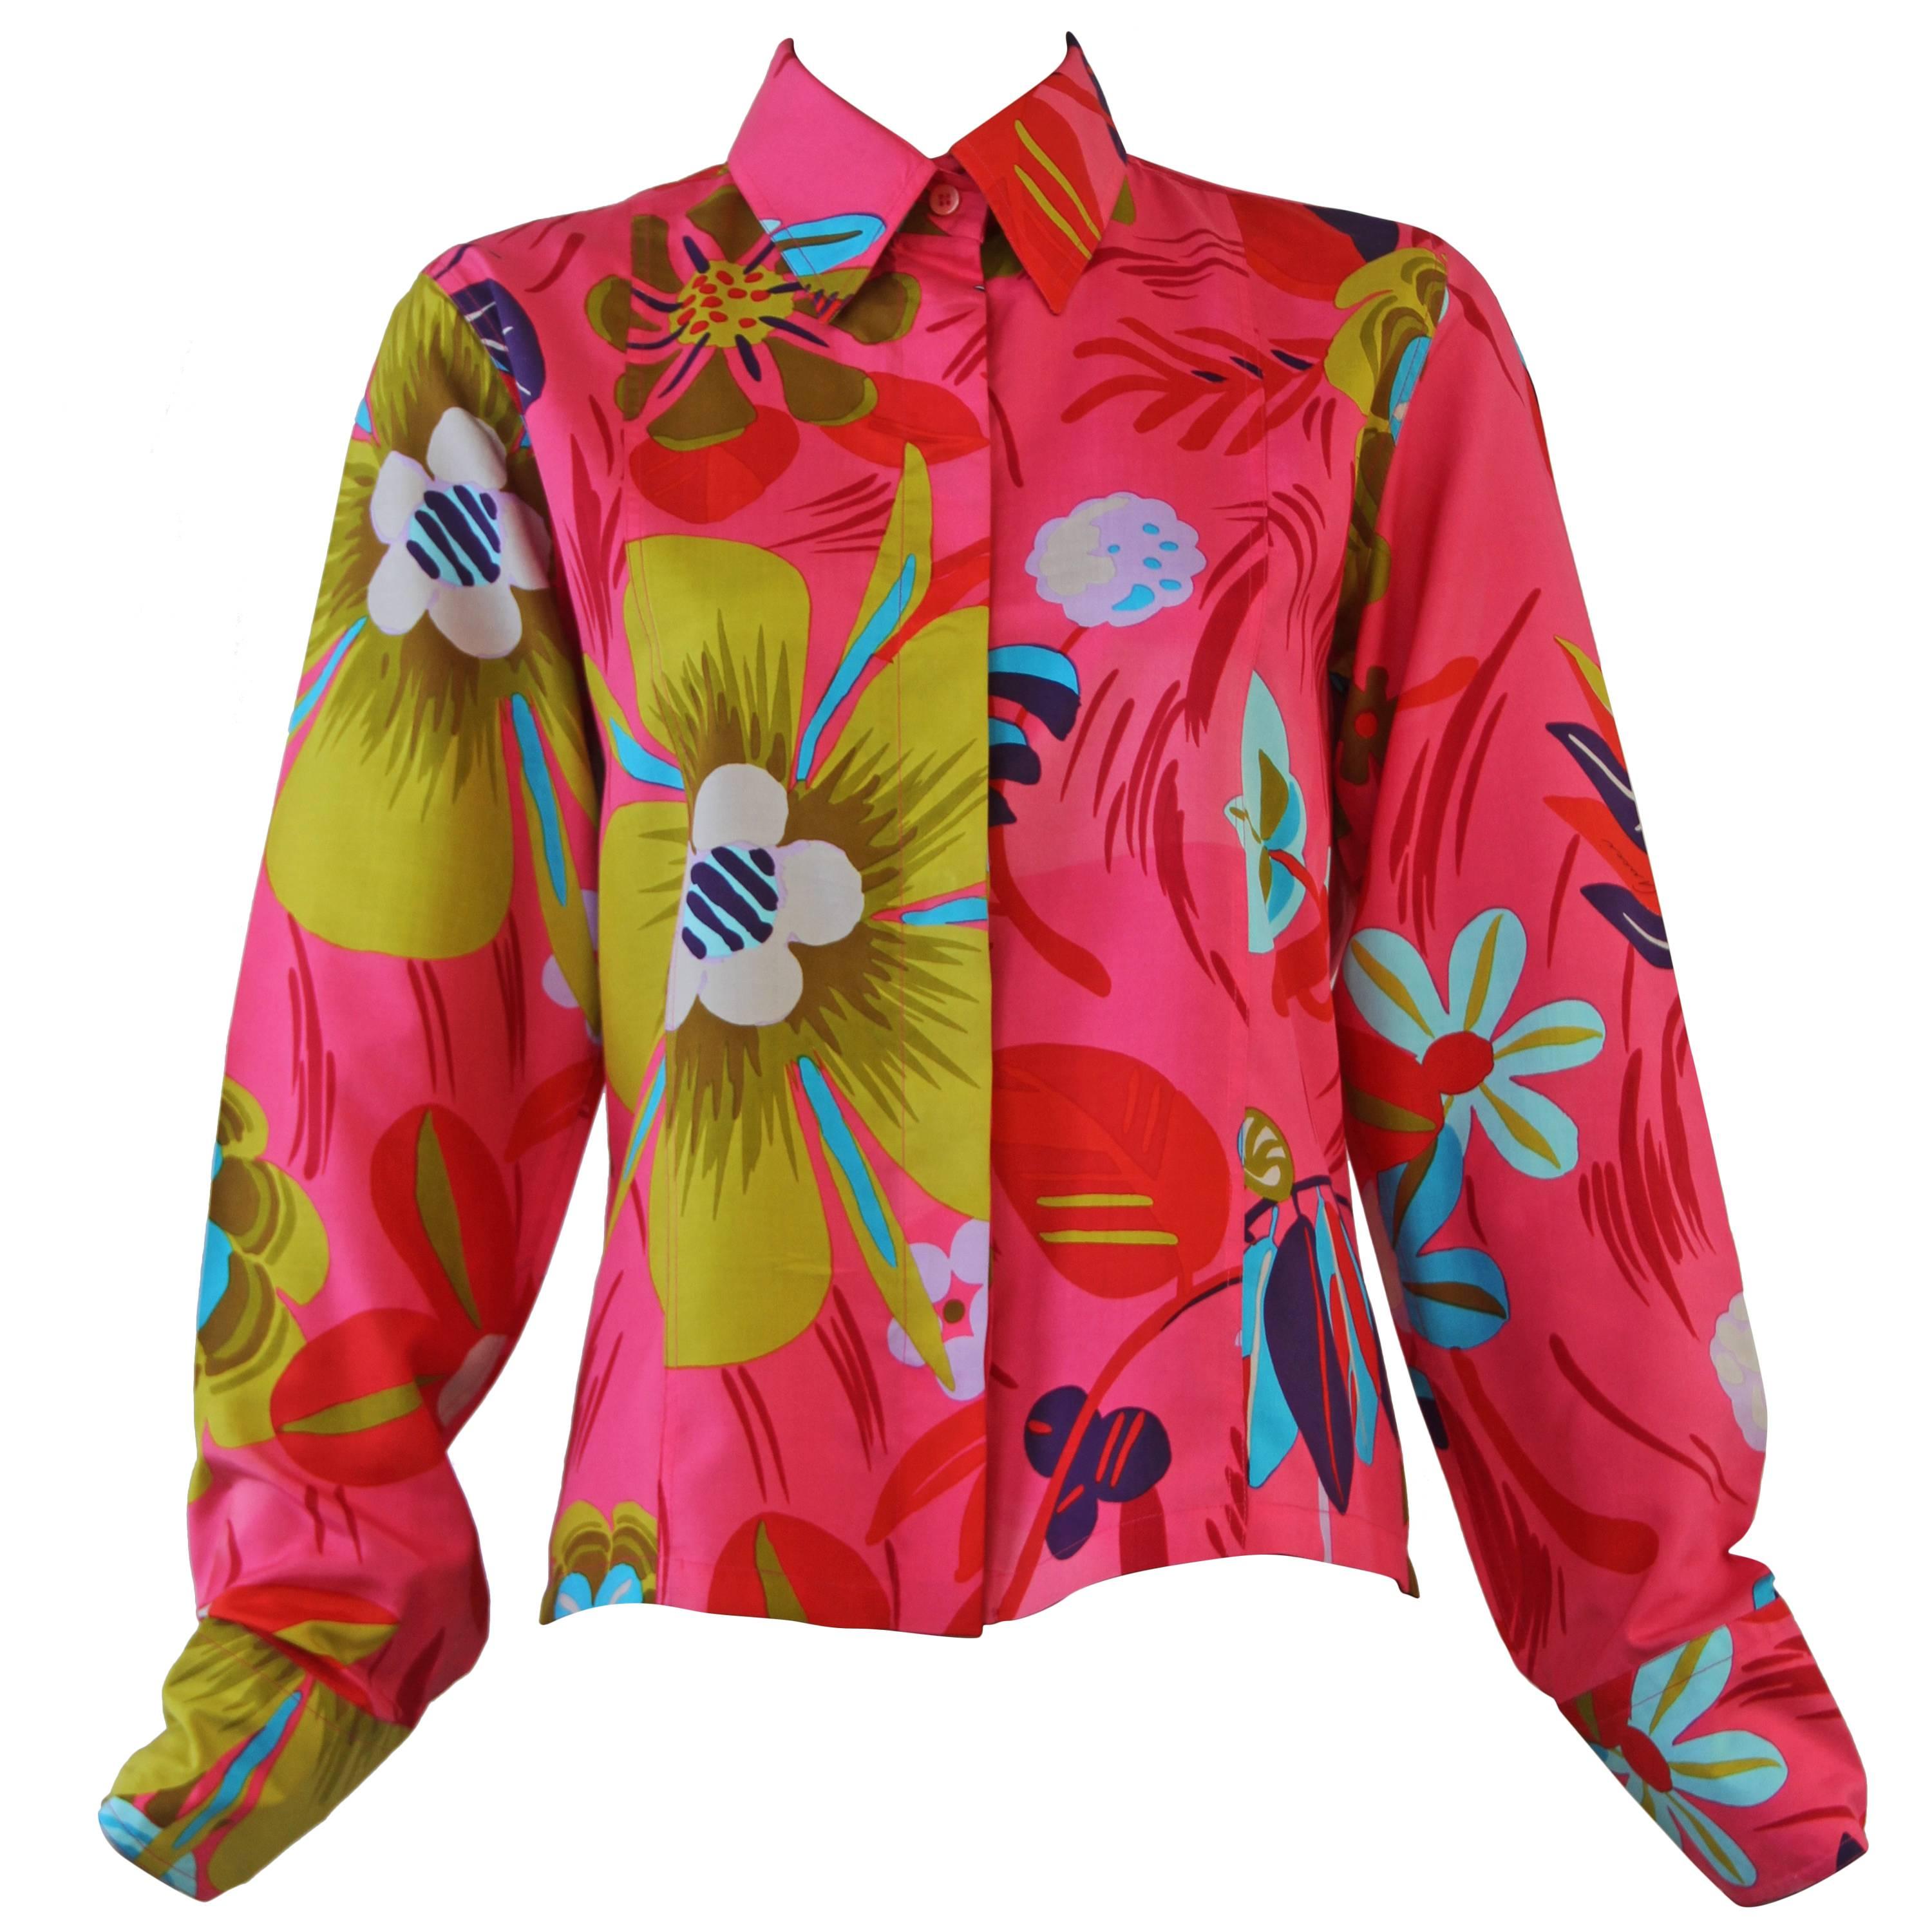 Tom Ford For Gucci Silk Printed Shirt Spring 1999 For Sale